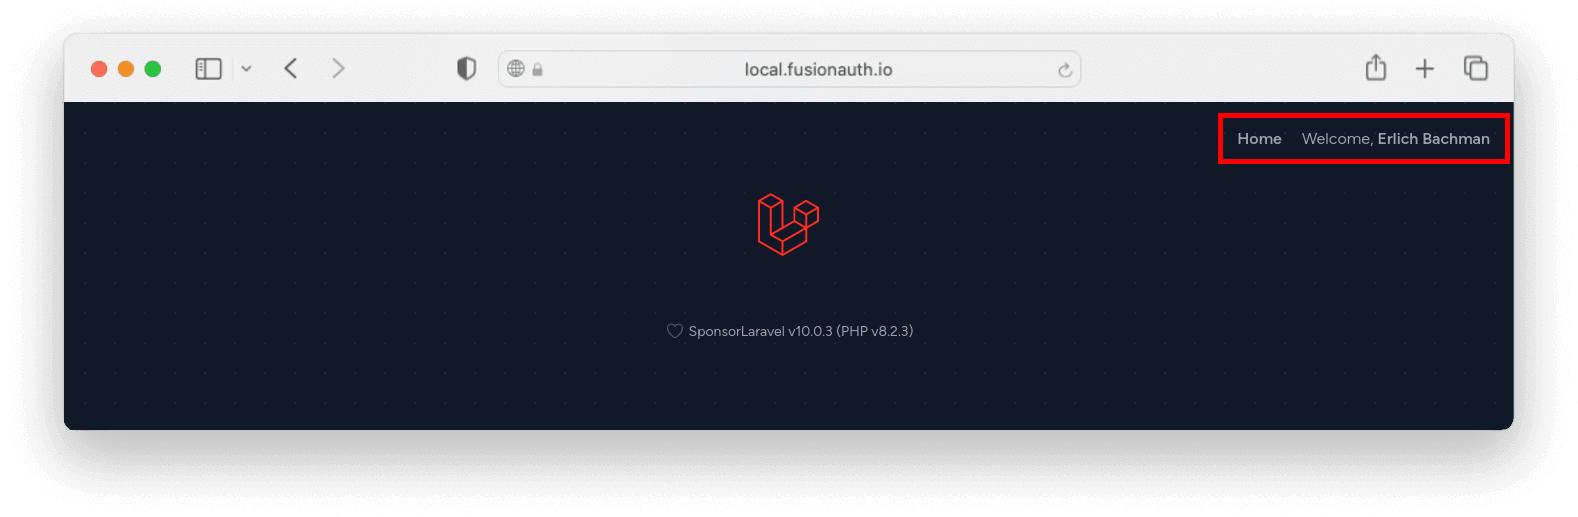 The default Laravel application while being logged in.